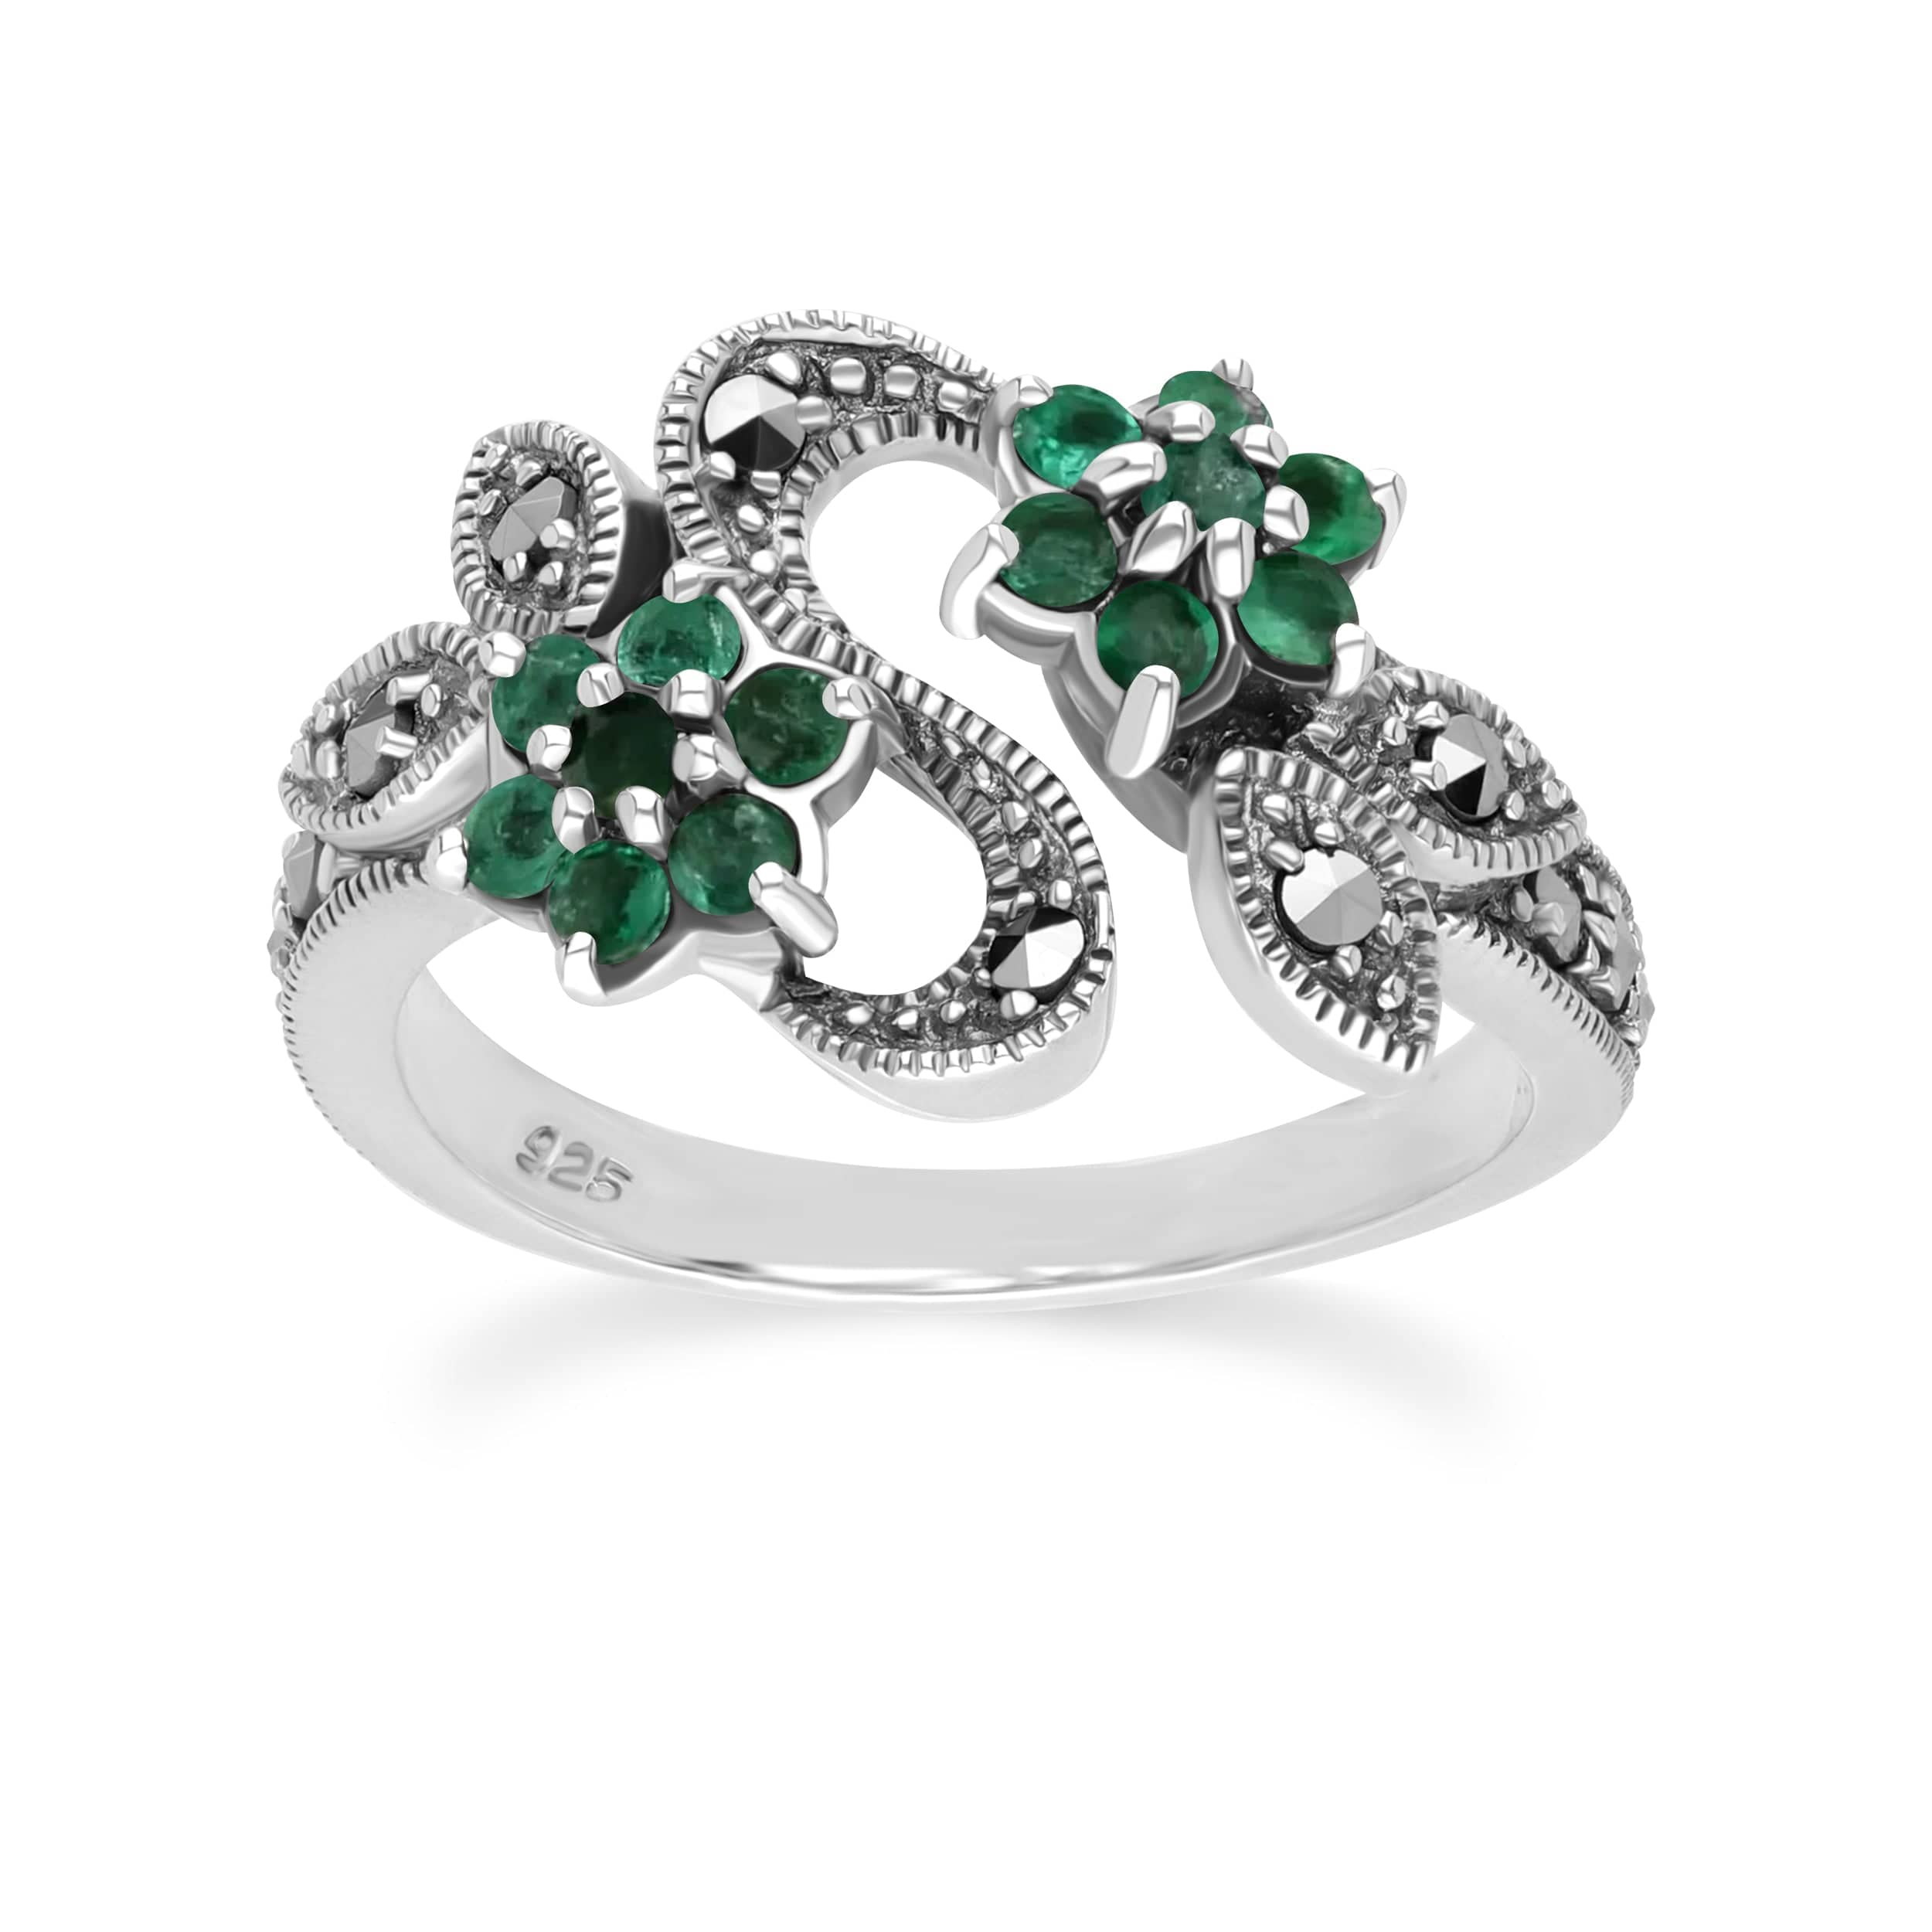 Art Nouveau Style Round Emerald & Marcasite Flower Ring in Sterling Silver